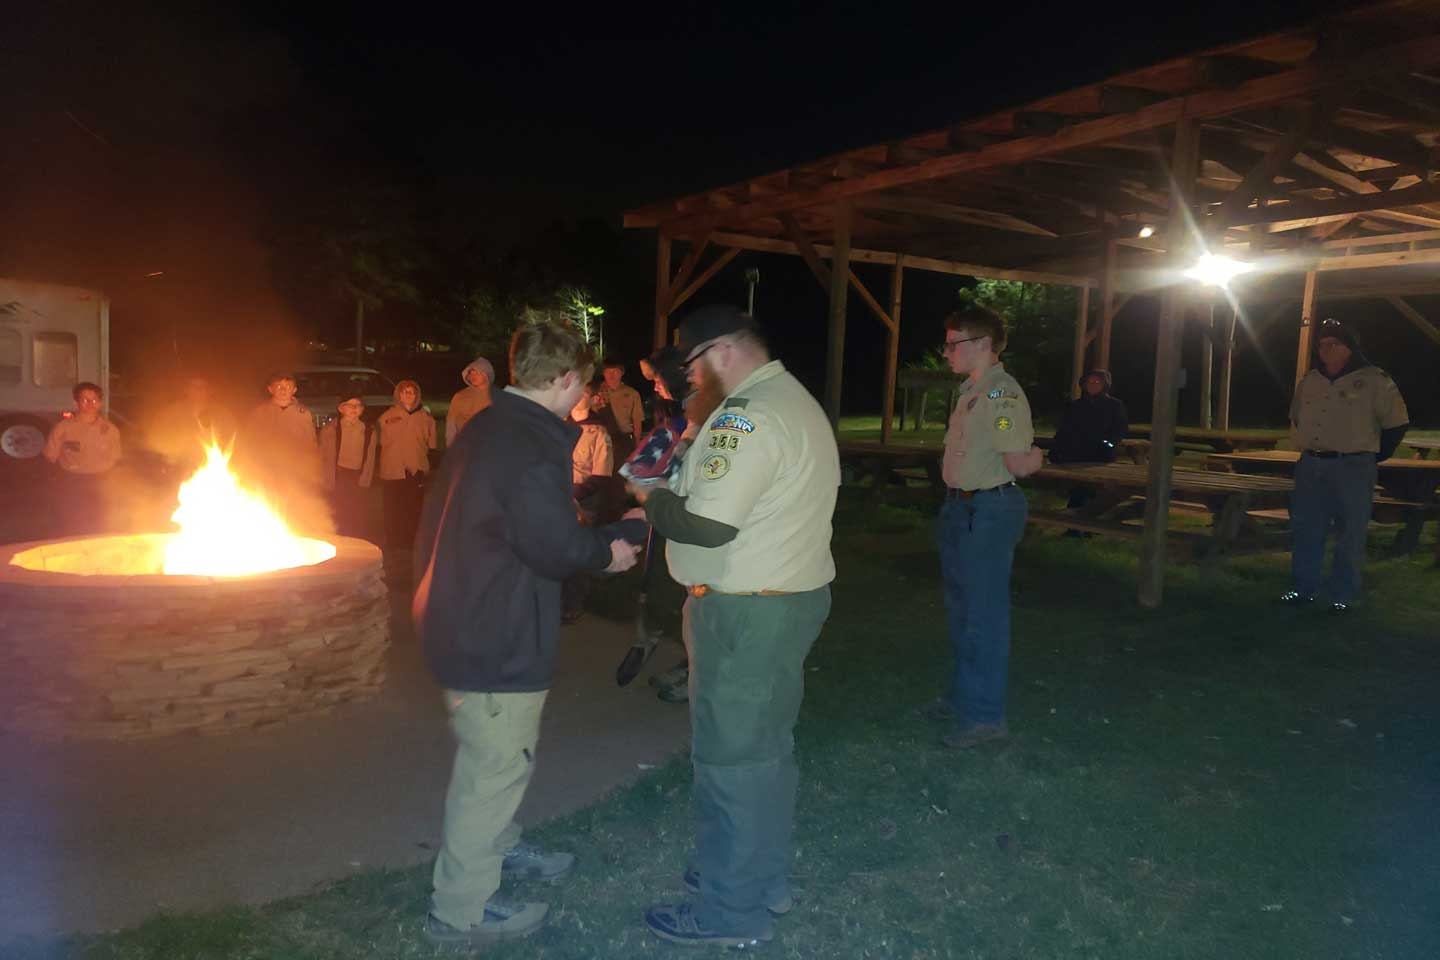 On Thursday March 14, 2019, Officers, and Auxiliary Members of Veterans of Foreign Wars Post 7402 were joined by members of Boy Scout Troop 353 {Powder Springs. GA.} and Troop 23{Rockmart, GA.} ceremoniously retiring 75 United States of American flags.